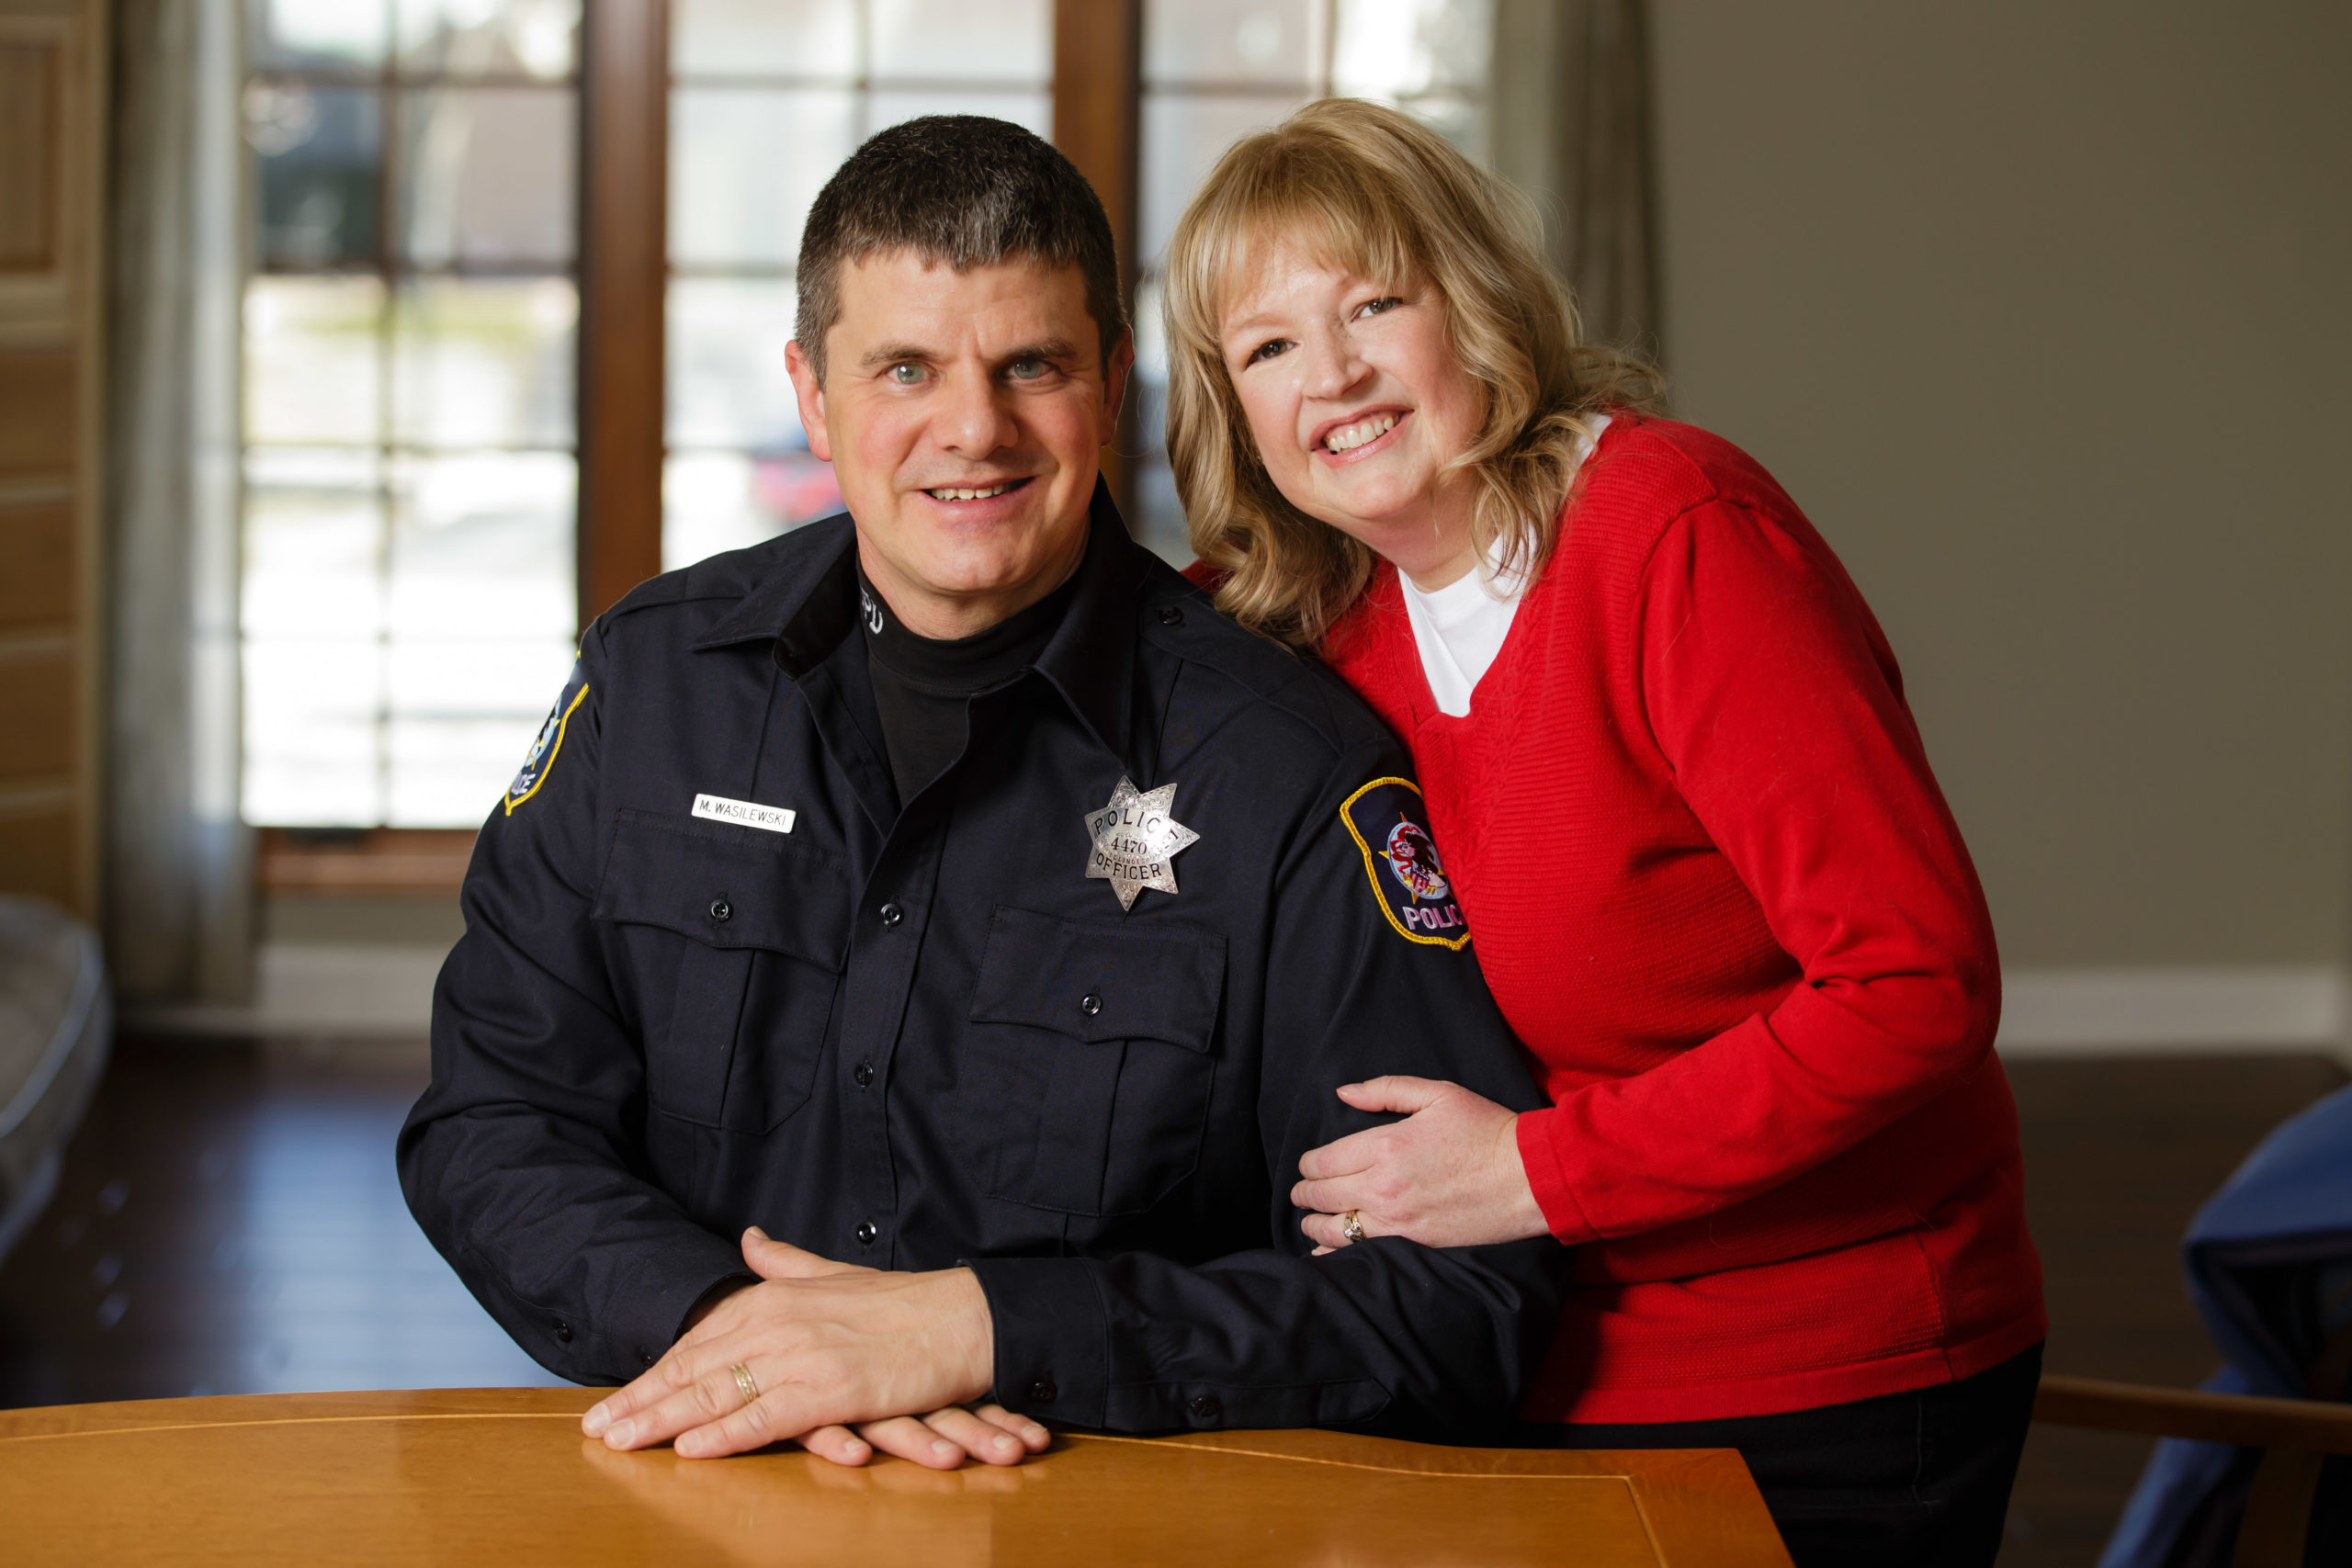 Police officer and person smiling together